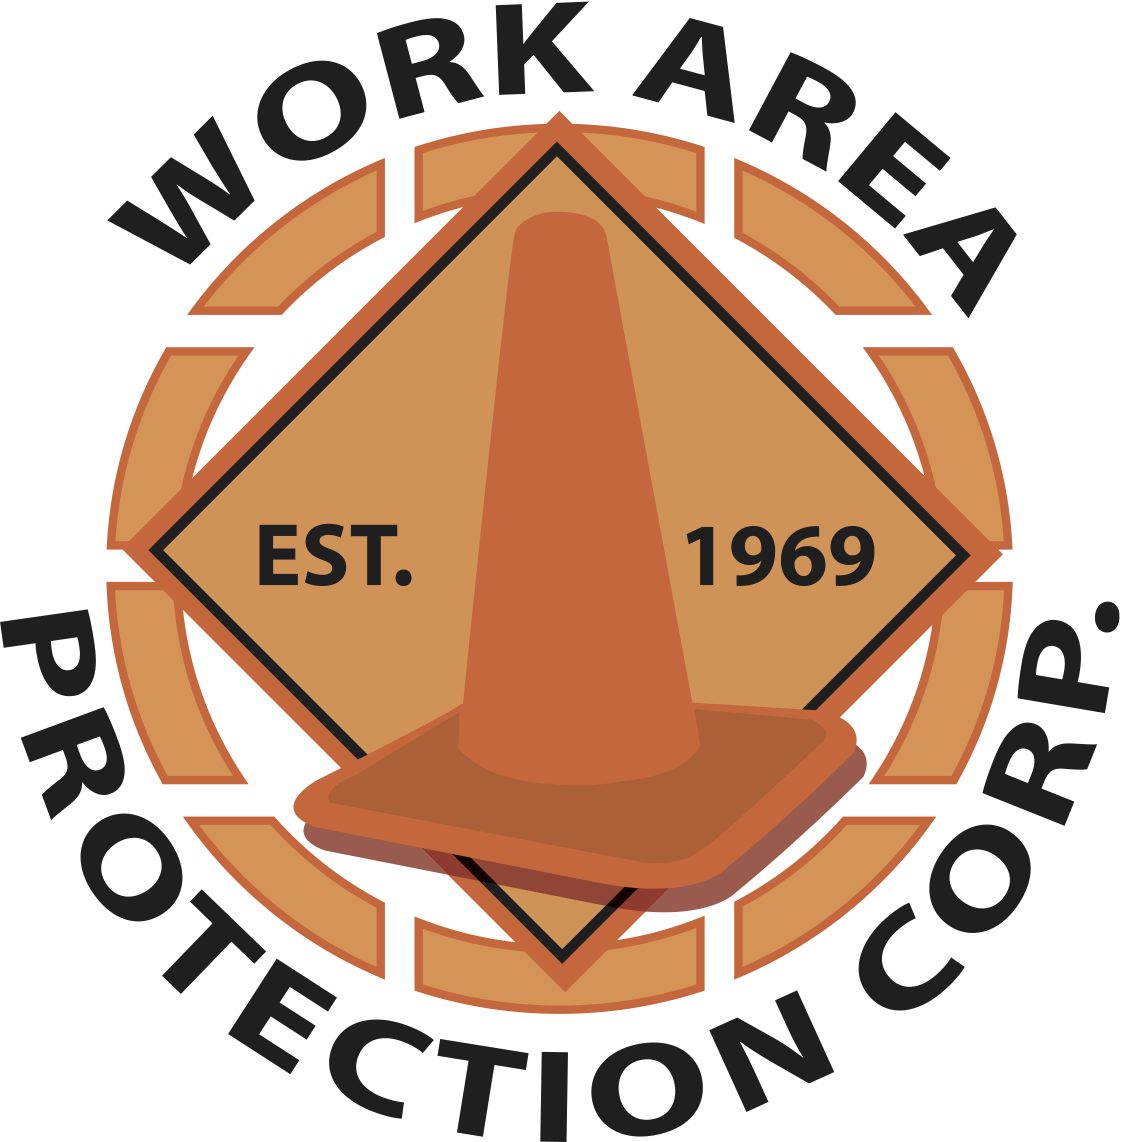 Work Area Protection Corp. logo